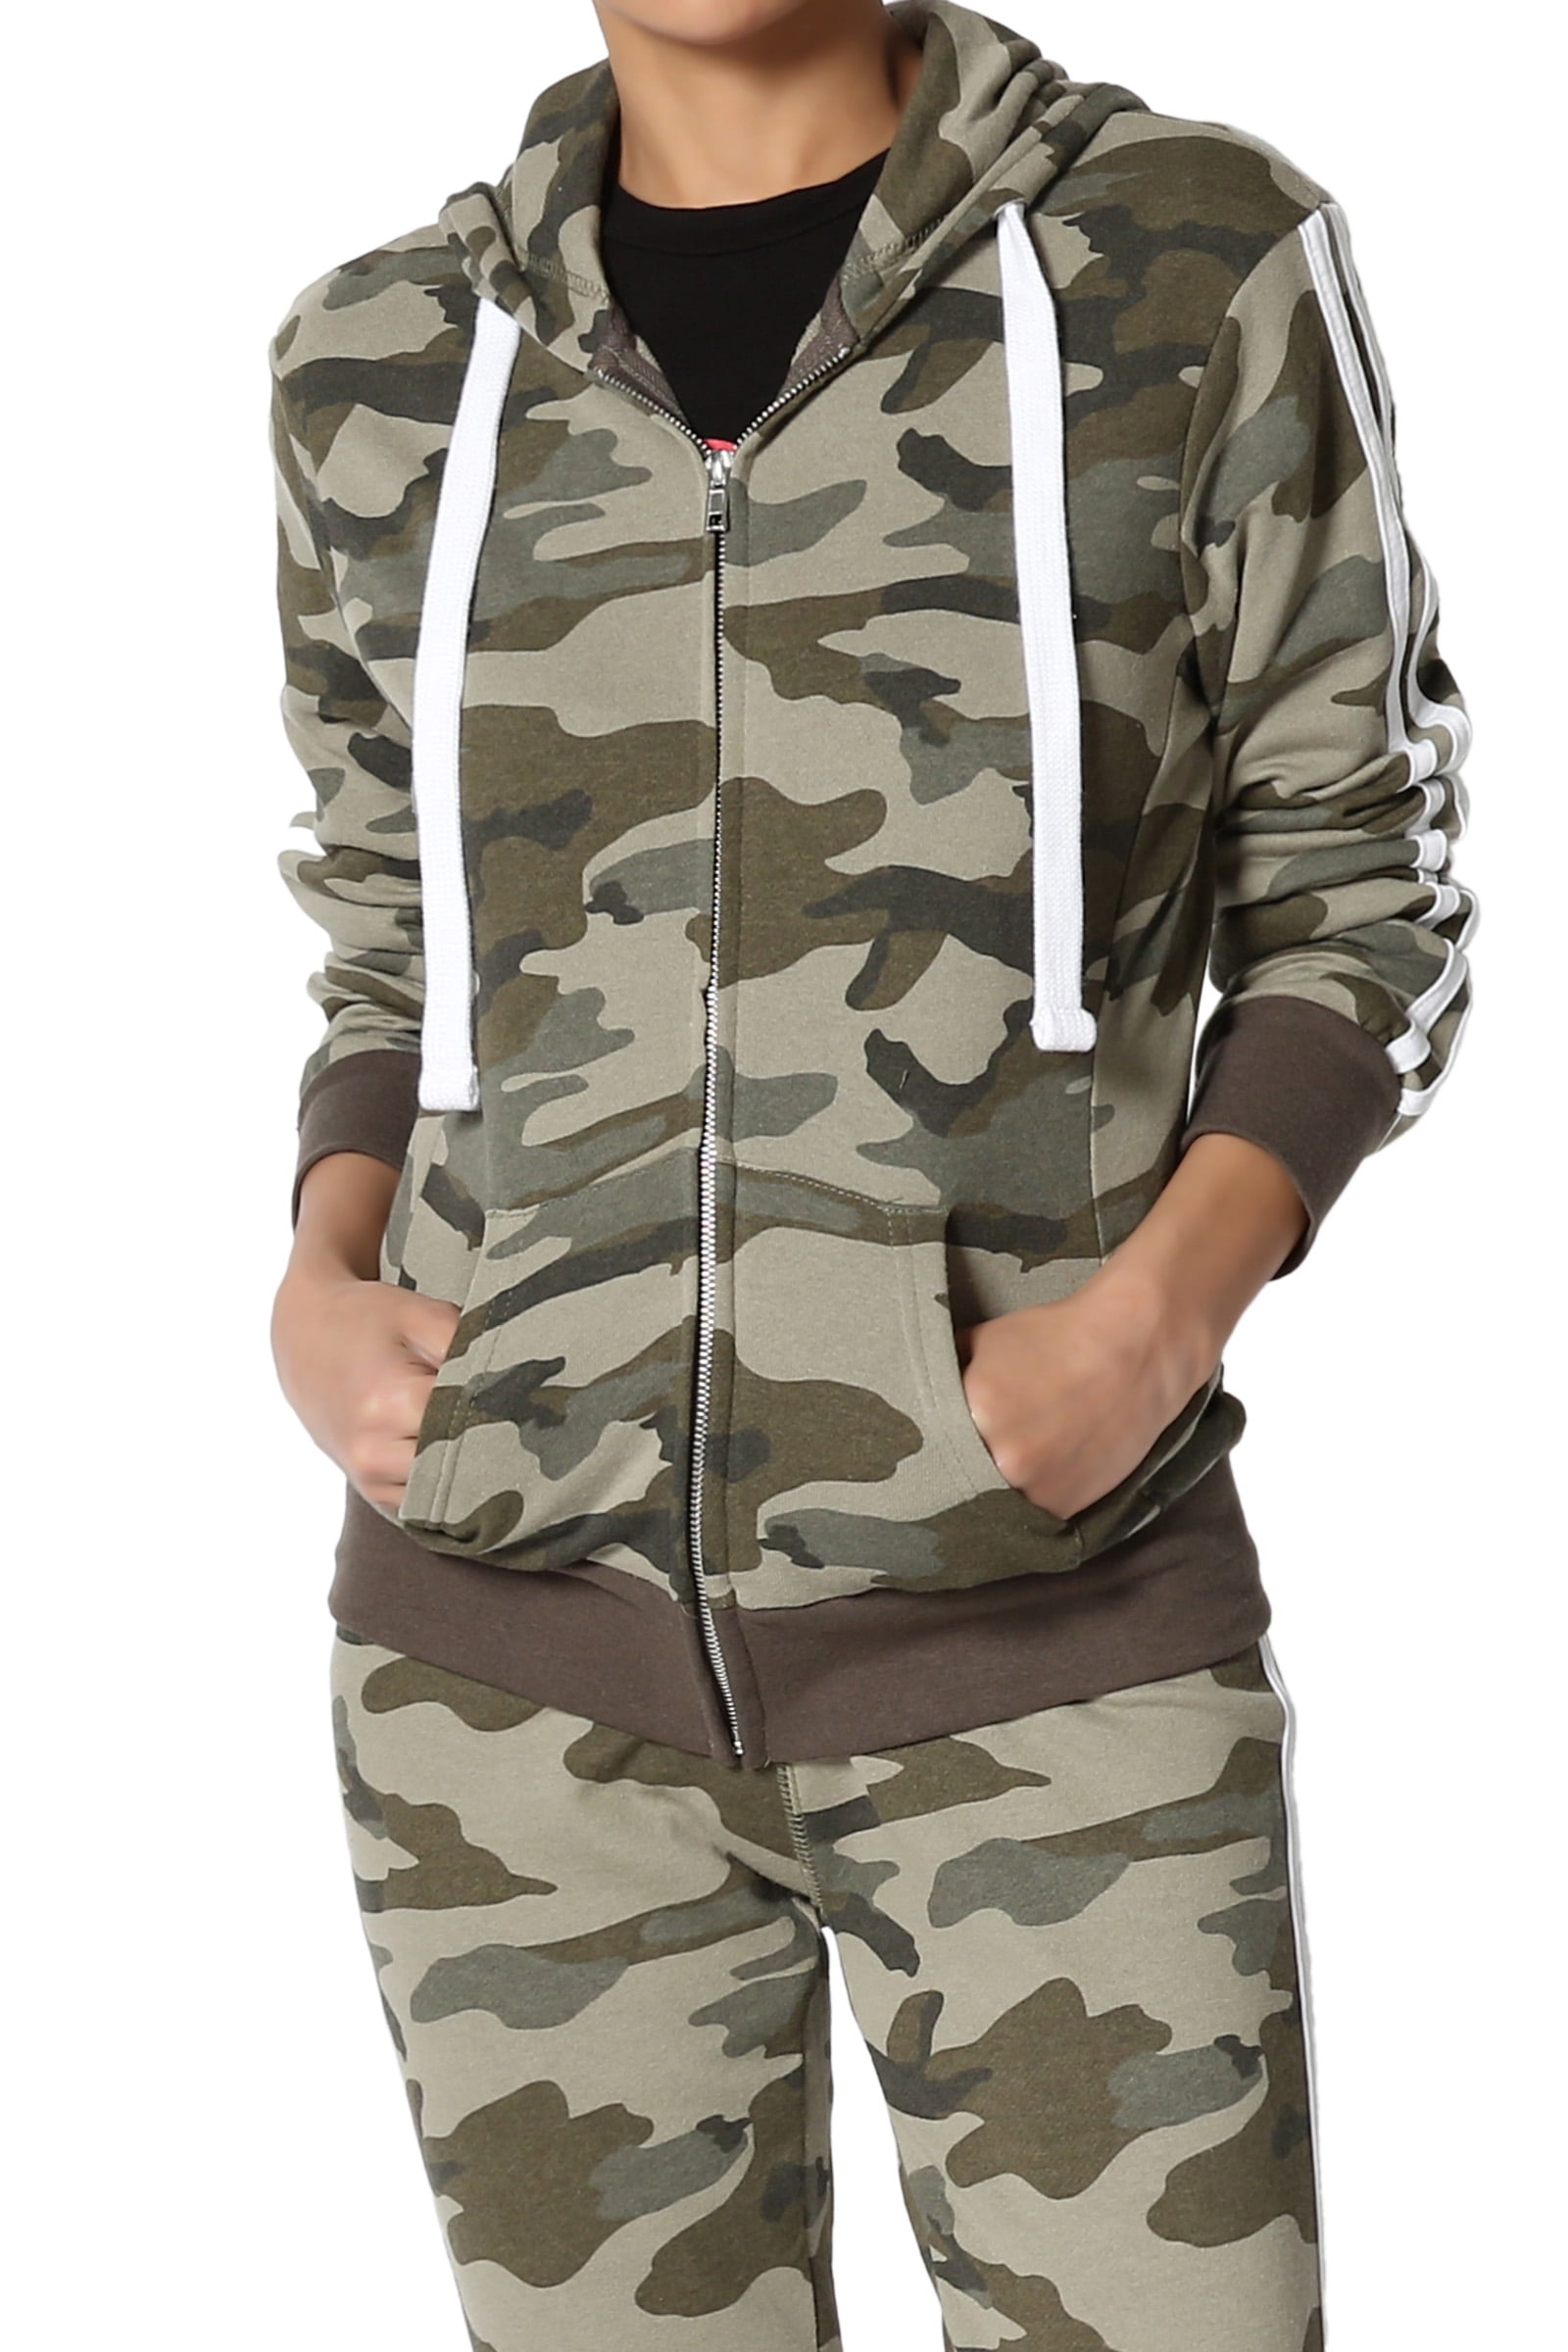 Kids Army GAME Camo Camouflage Hoody Tops & Joggers TrackSuit Zip Hoodie Top New 